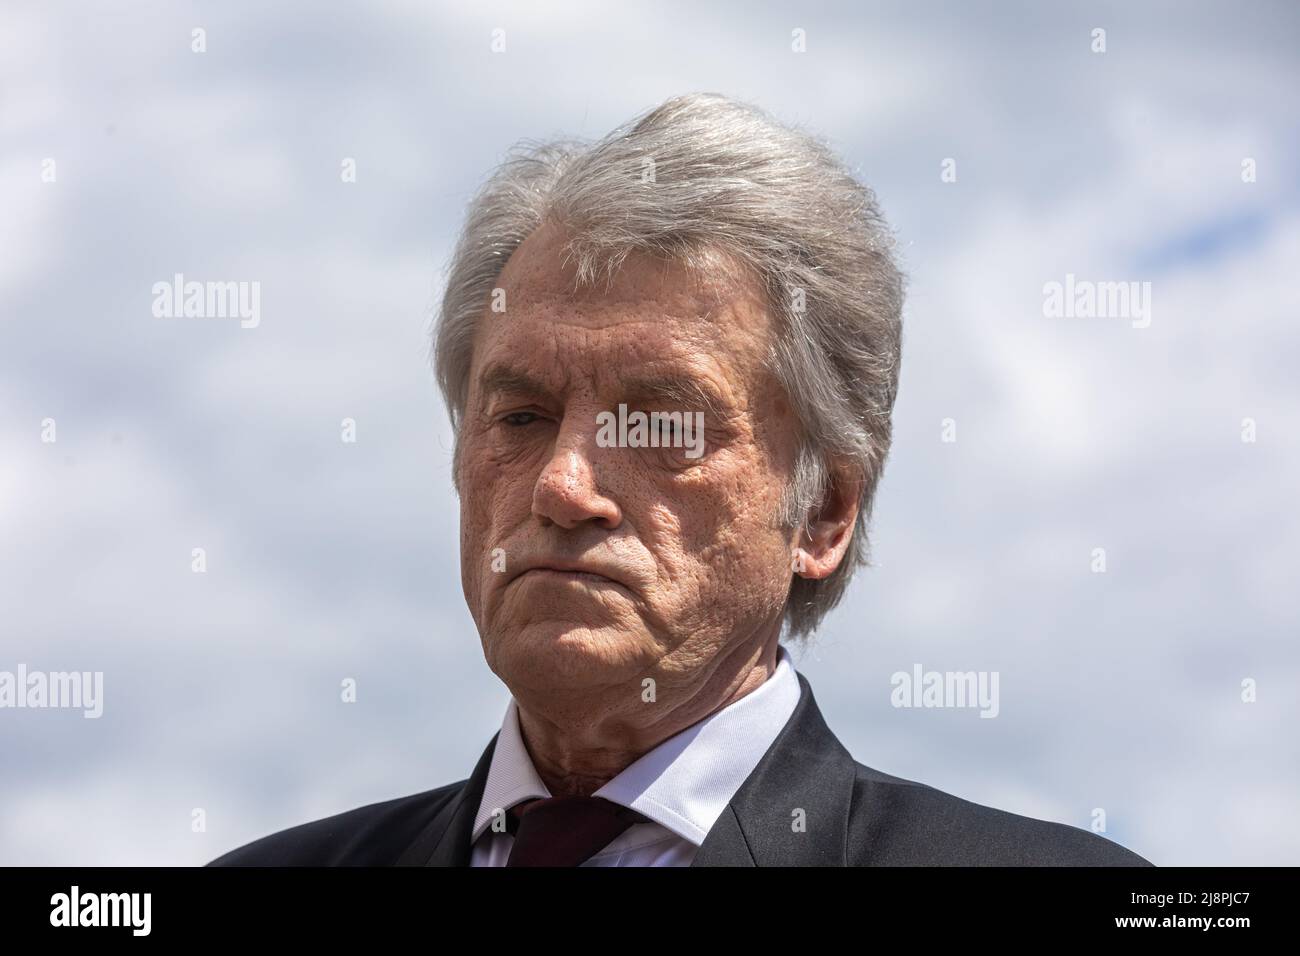 Kyiv, Ukraine. 17th May, 2022. Former president of Ukraine Viktor Yushchenko takes part in the farewell ceremony. The first president of independent Ukraine, Leonid Kravchuk said goodbye in Kyiv. The farewell ceremony took place in the 'Ukrainian House', located on the European Square in the center of the capital. Credit: SOPA Images Limited/Alamy Live News Stock Photo